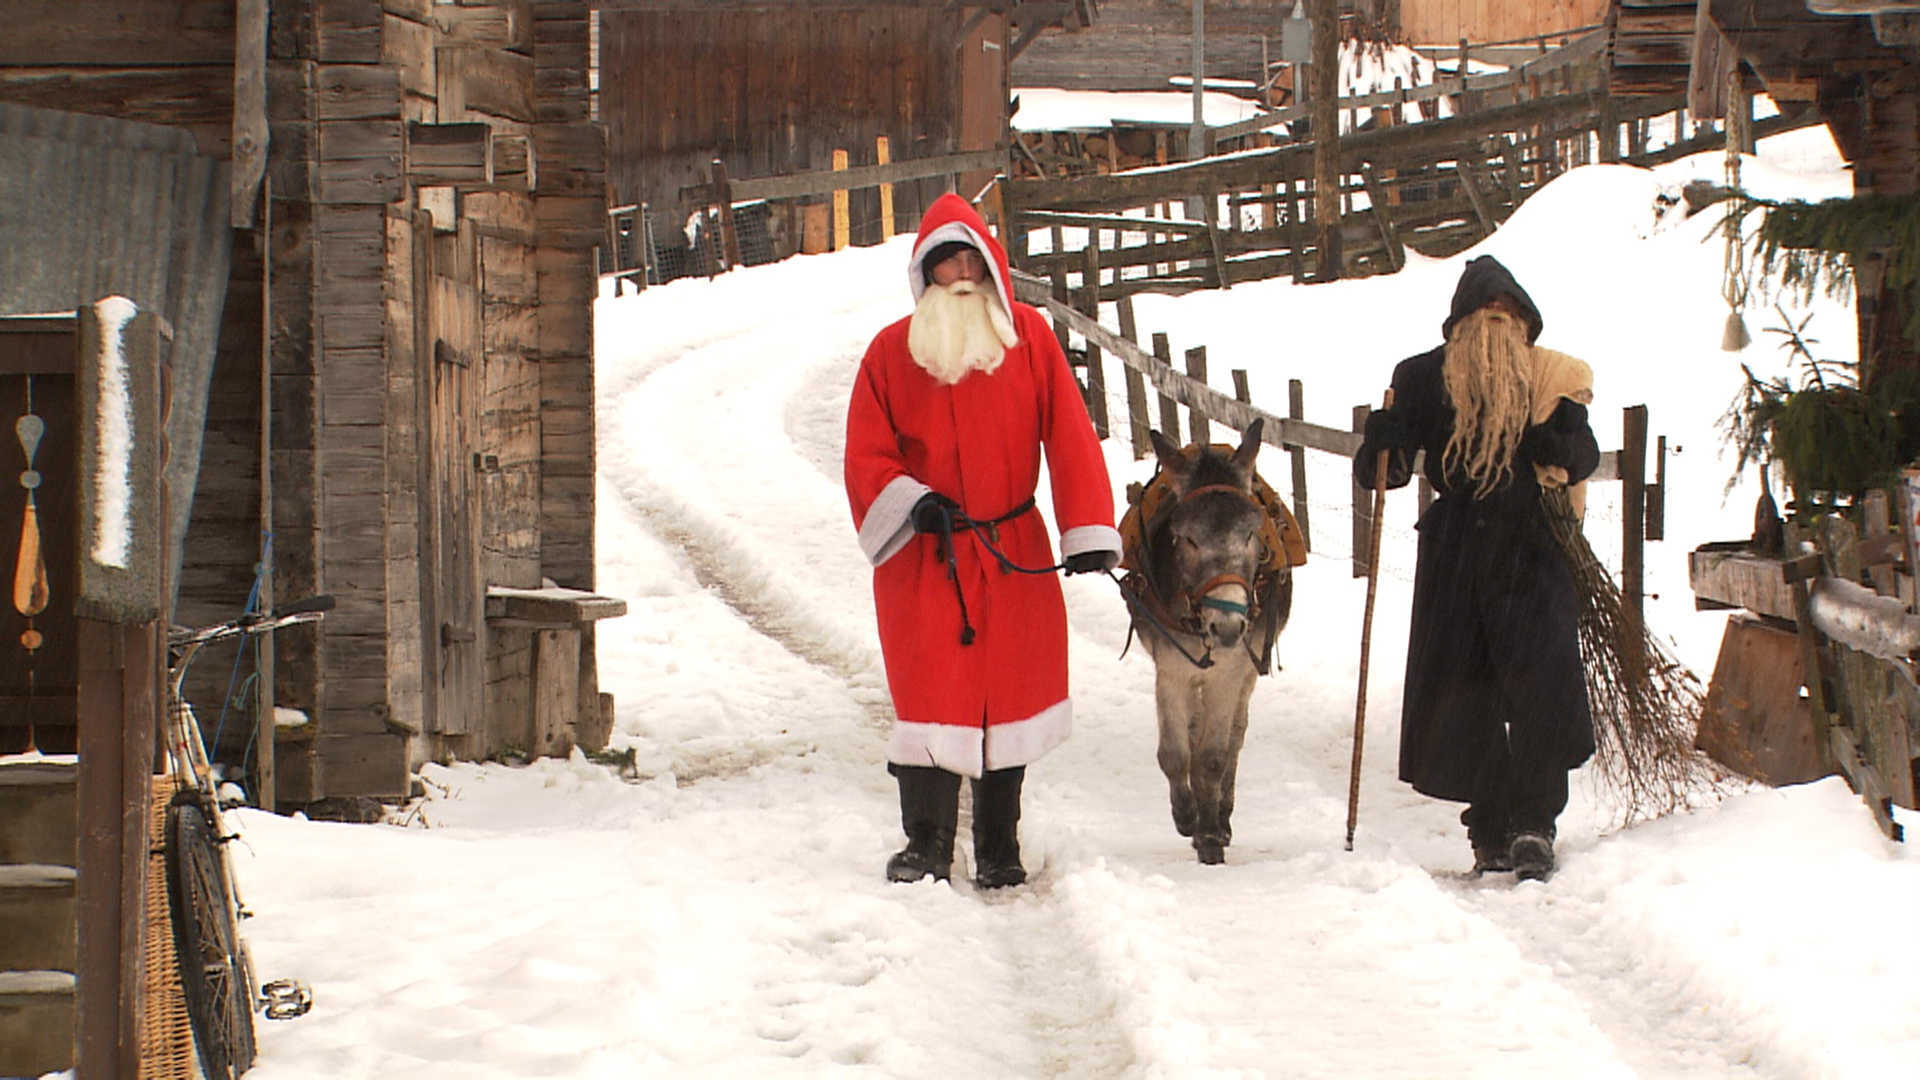 Samichlaus and Schmutzli make the rounds in the Alps